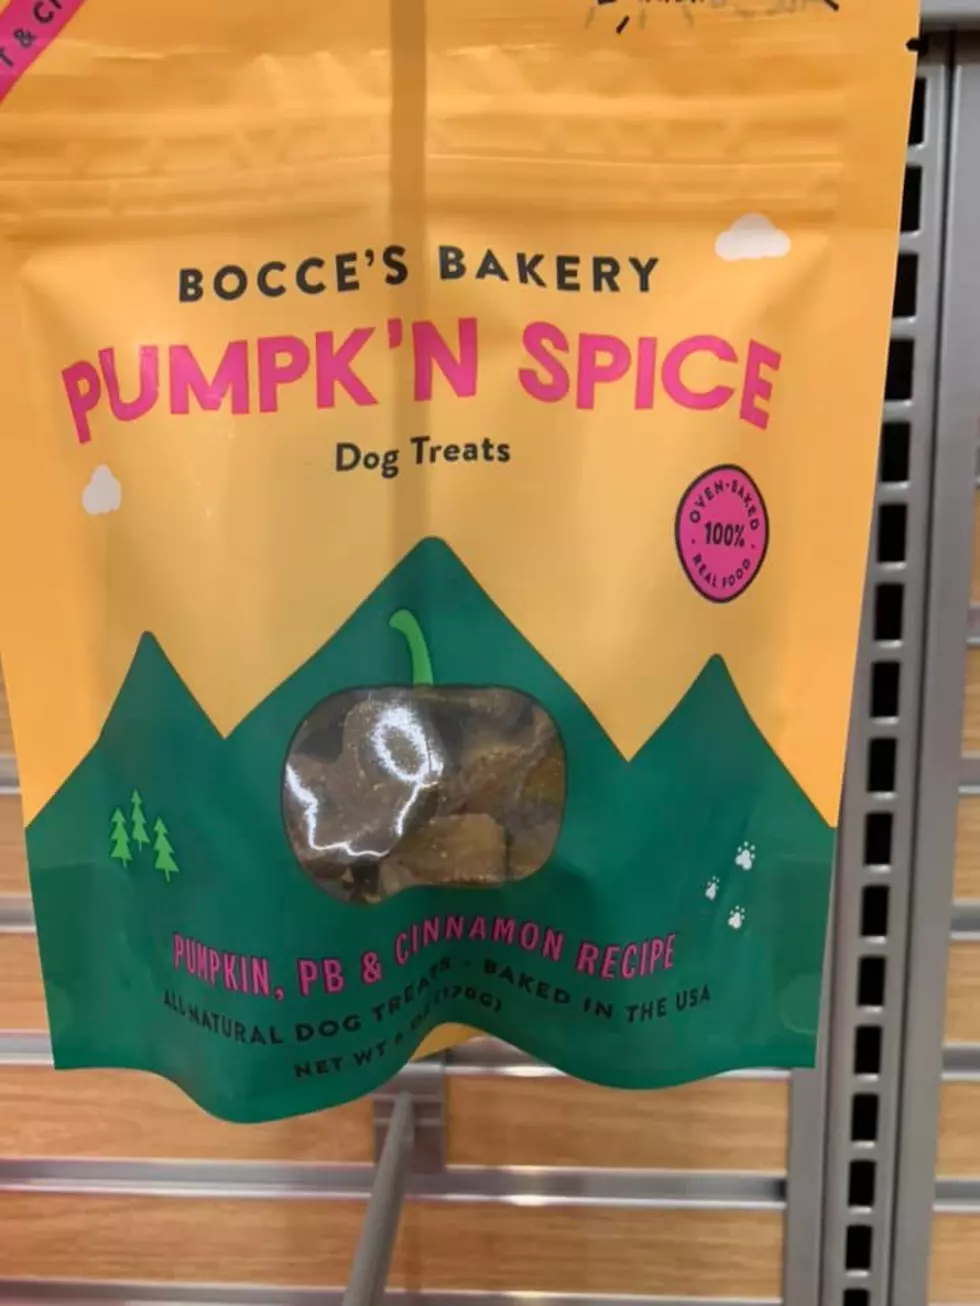 Hey Hudson Valley! Is this Taking Pumpkin Spice too Far?